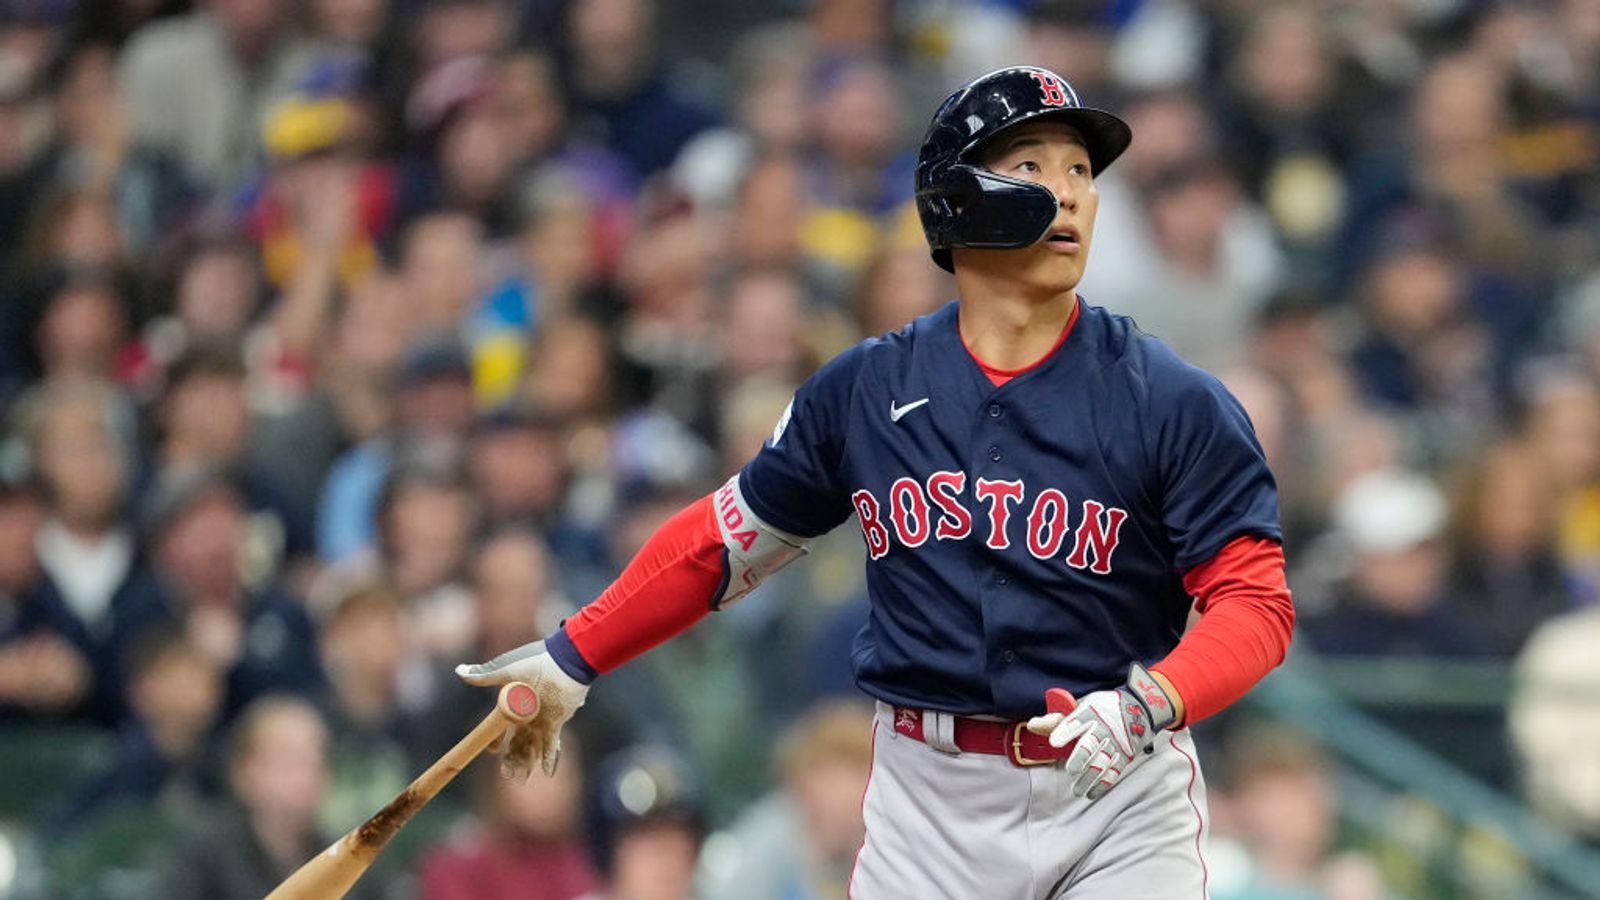 Yoshida homers twice in 8th as Red Sox beat Brewers 12-5